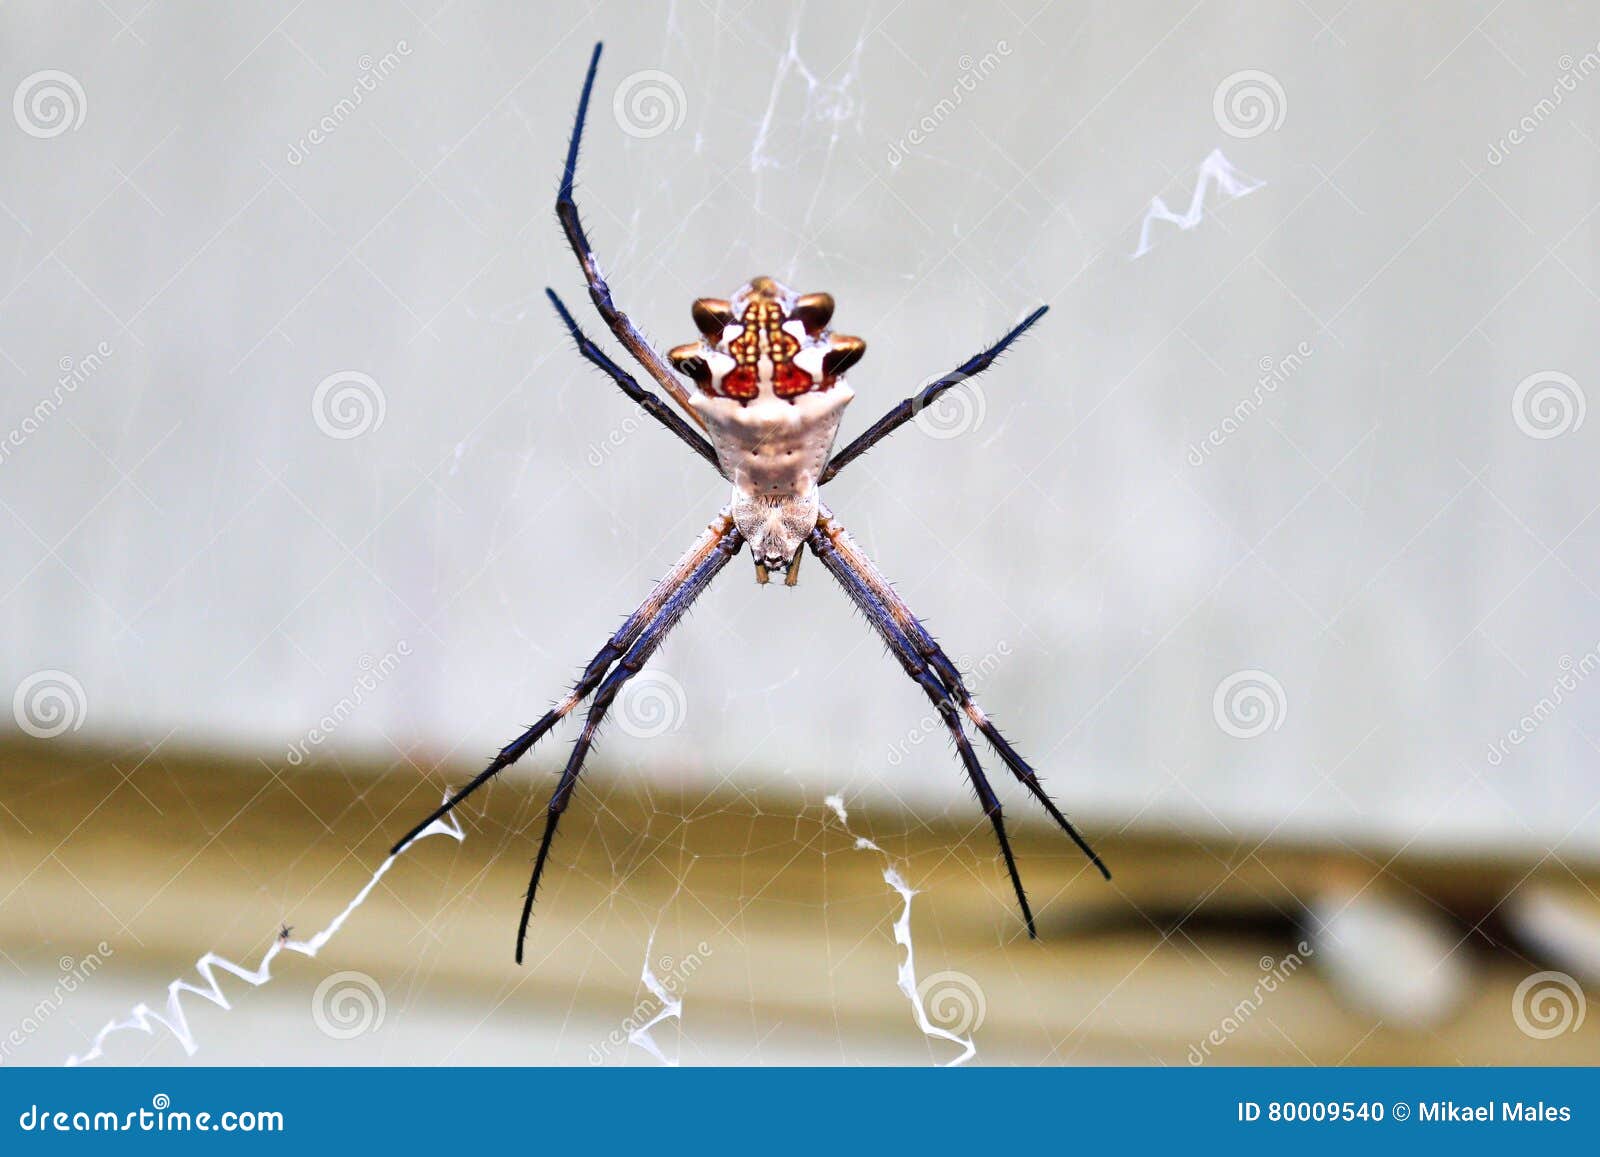 Silver Garden Spider Making Web Stock Photo Image Of Spinning